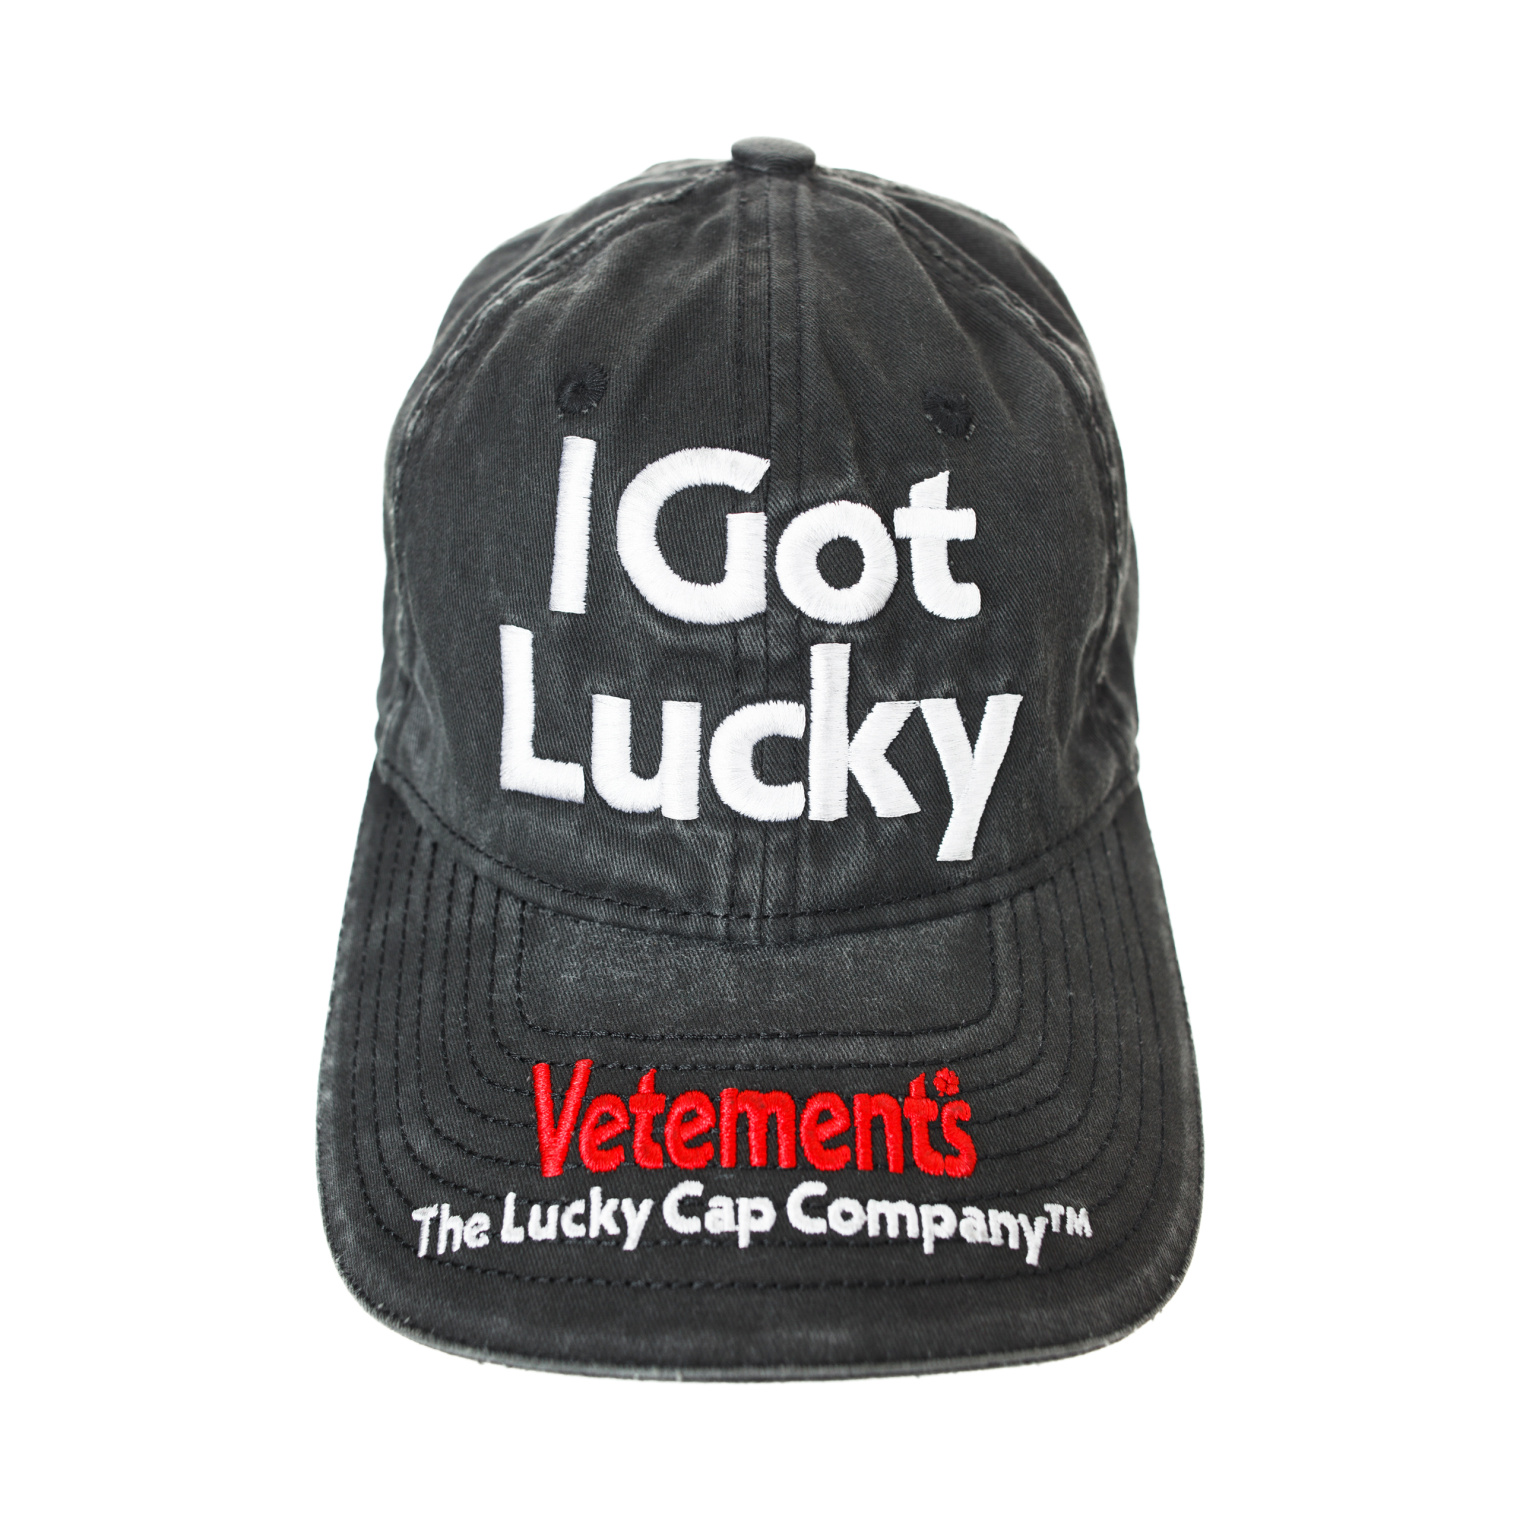 VETEMENTS Got lucky embroidered cap